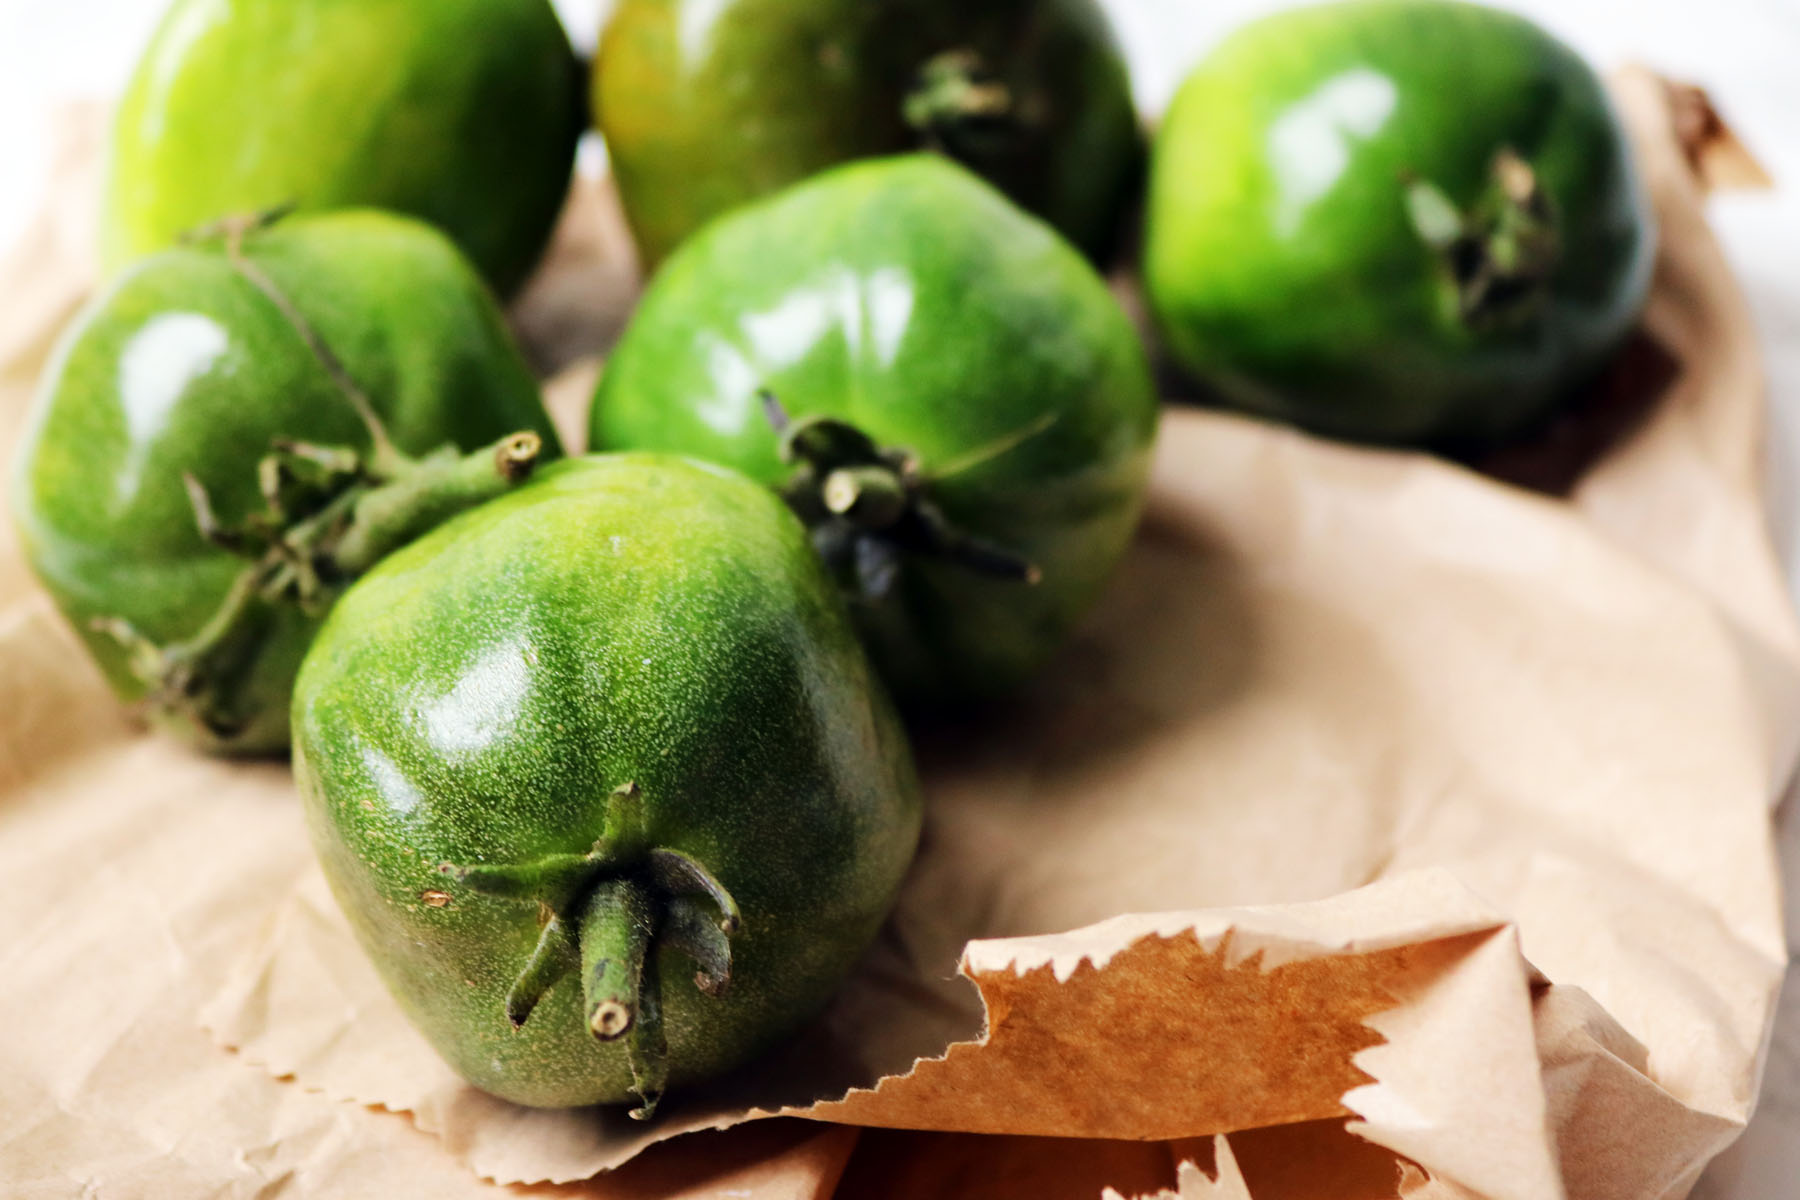 Green tomatoes and a brown paper bag